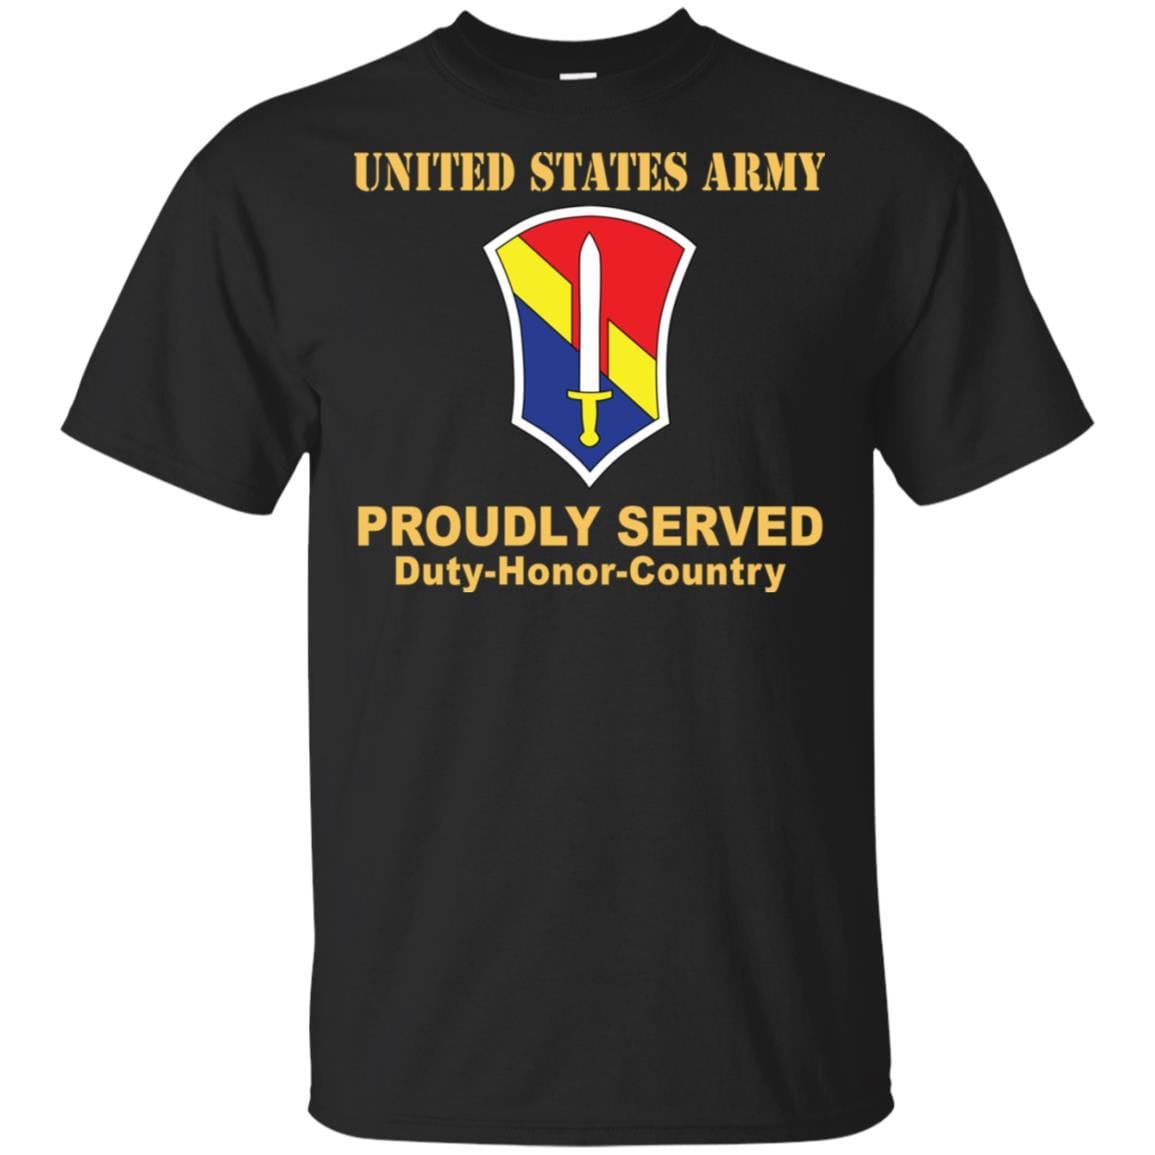 US ARMY 1 FIELD FORCE, VIETNAM- Proudly Served T-Shirt On Front For Men-TShirt-Army-Veterans Nation